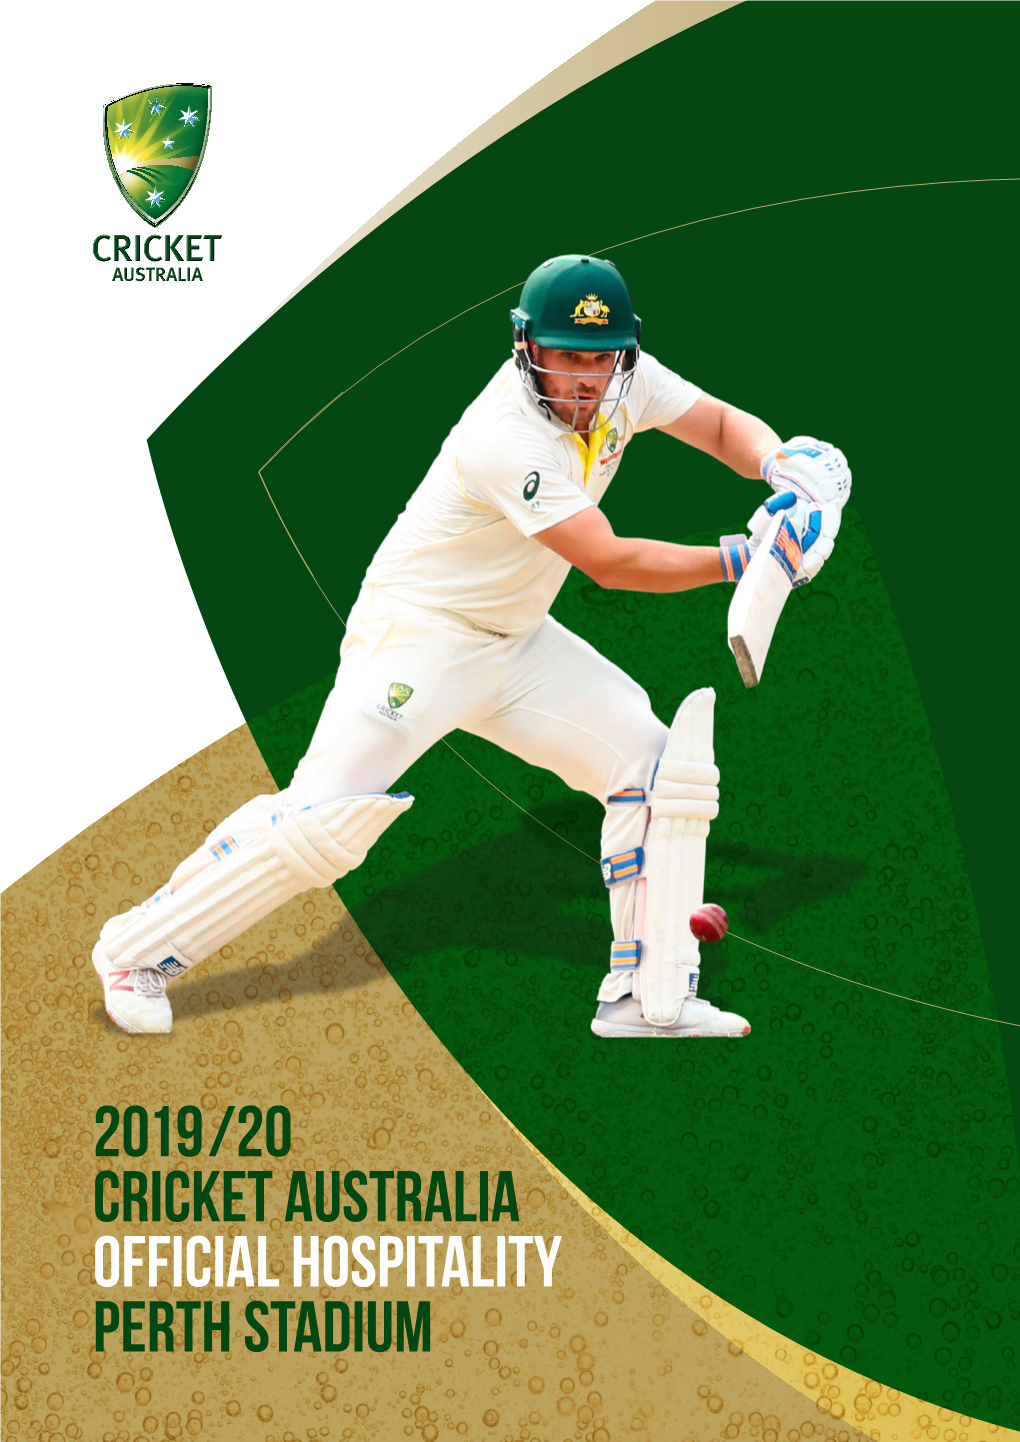 2019/20 Cricket Australia Official Hospitality Perth Stadium ——— WELCOME ——— 2019–20 FIXTURE